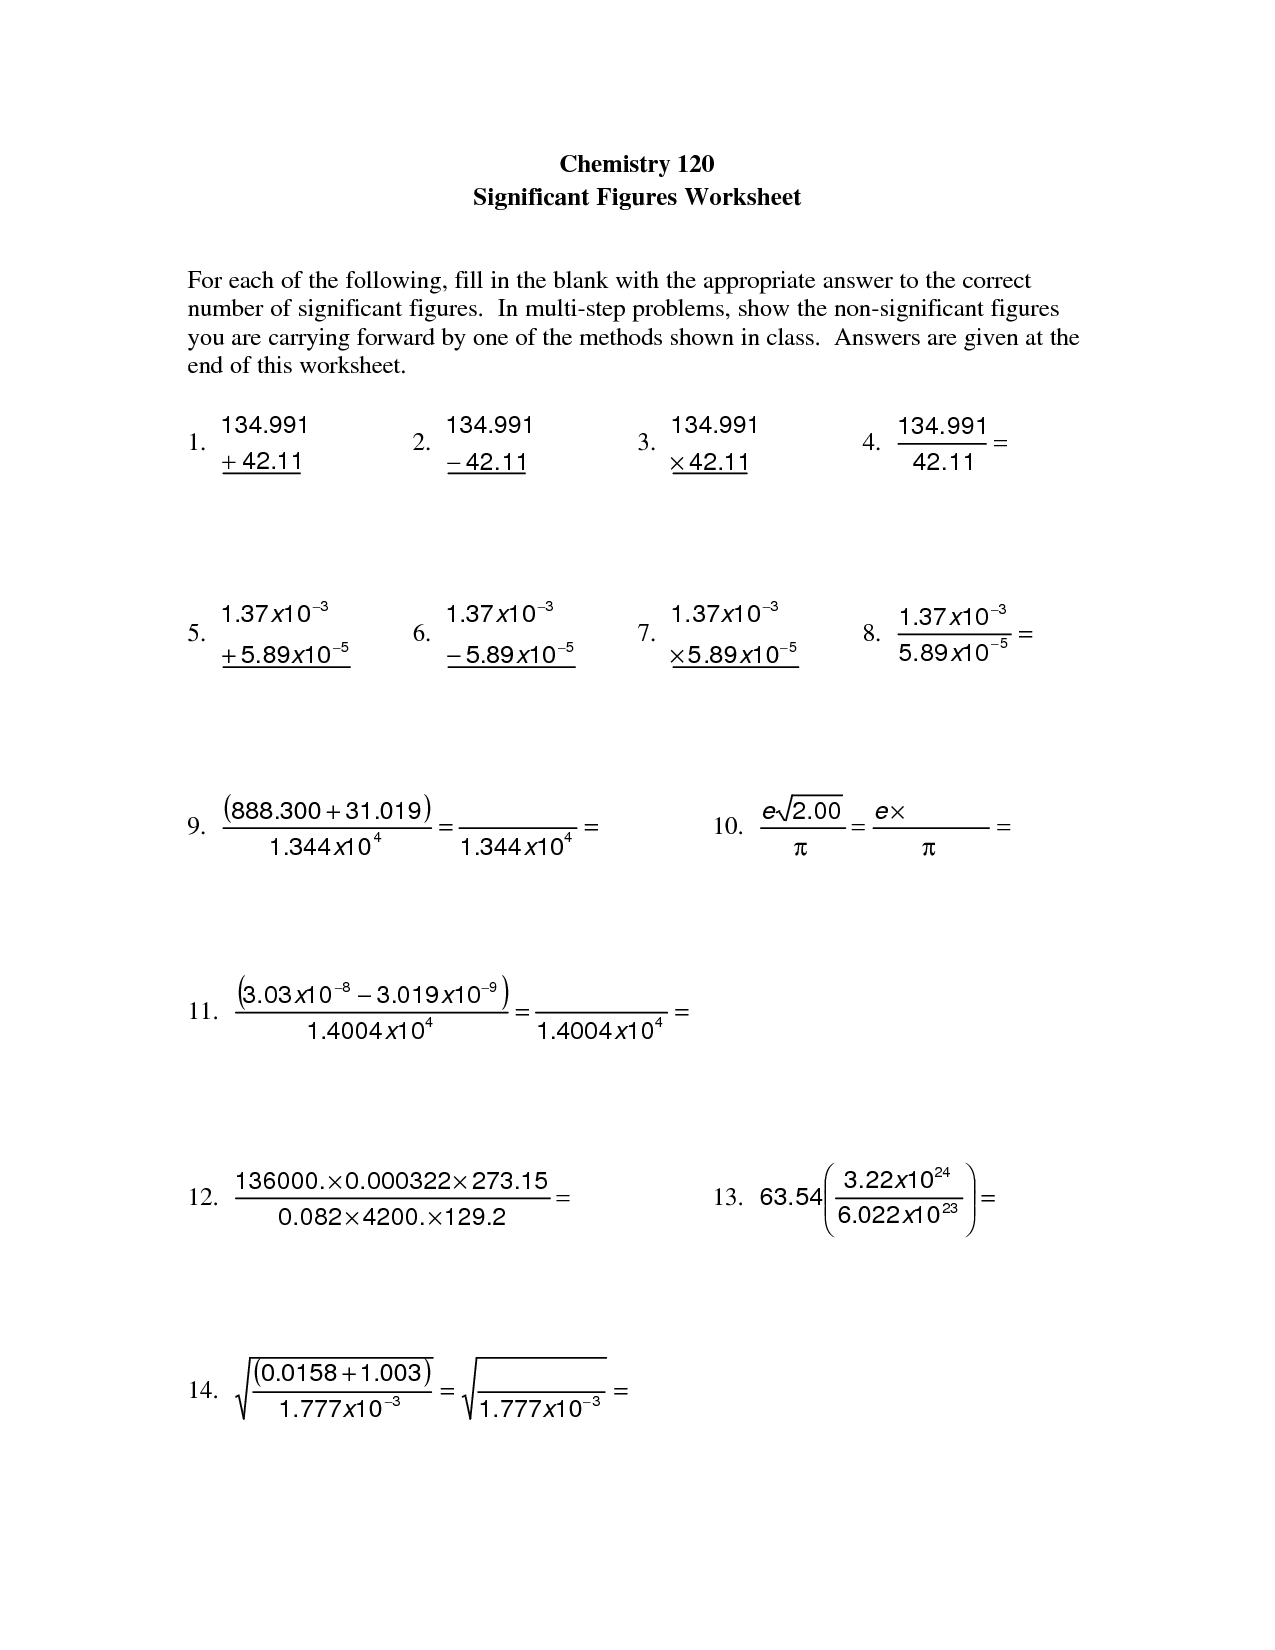 16-best-images-of-significant-figure-worksheets-high-school-math-scale-measurement-worksheets